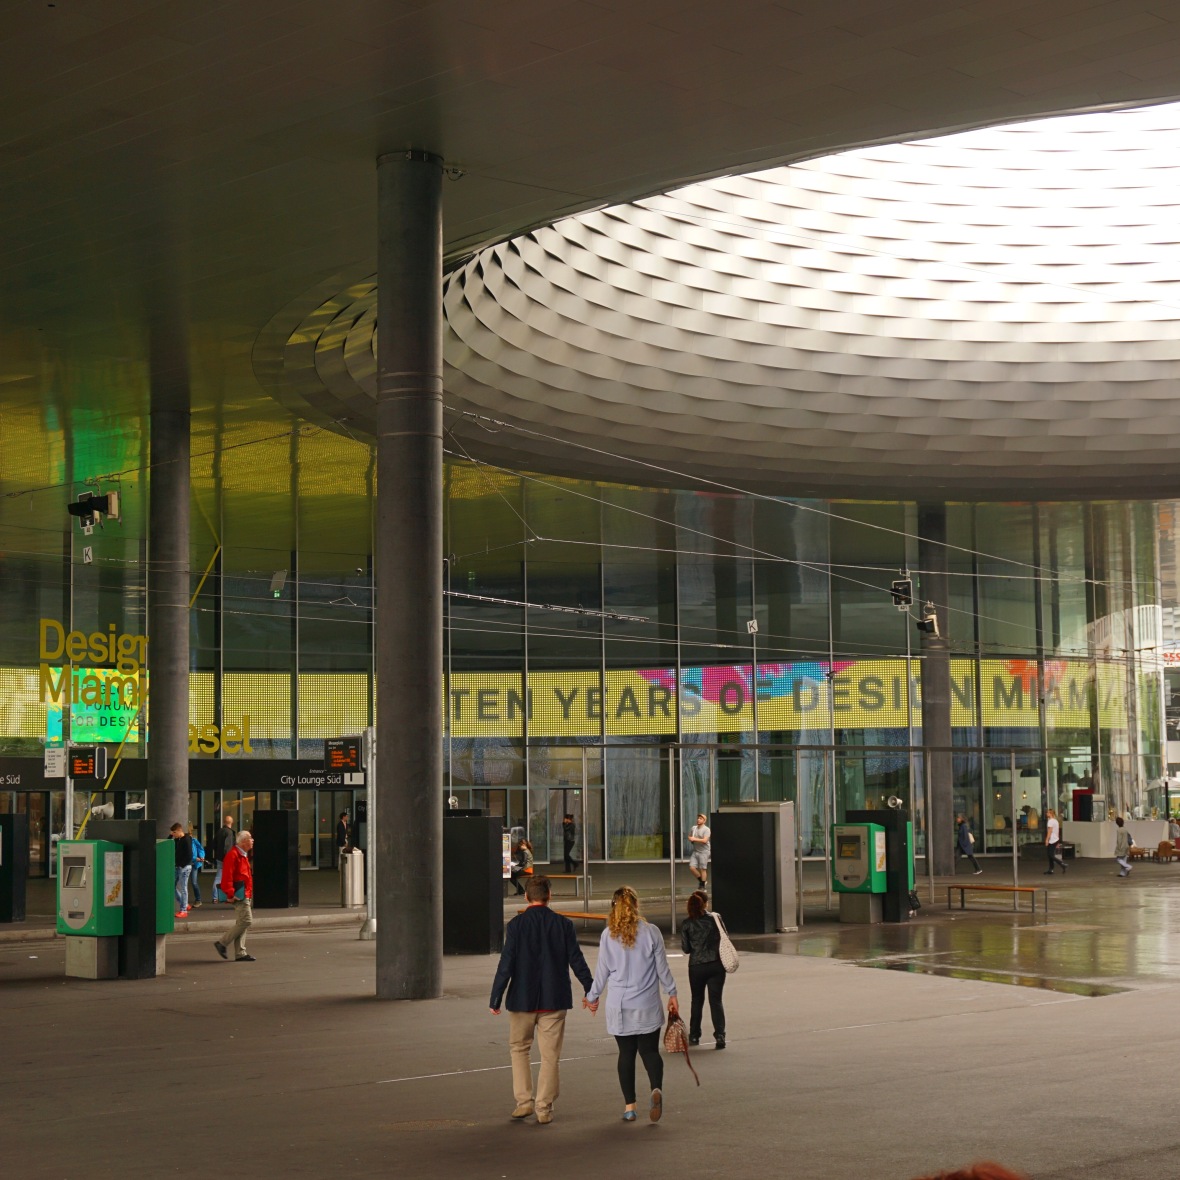 Design Miami/ Basel 2015, at the Basel Messe.